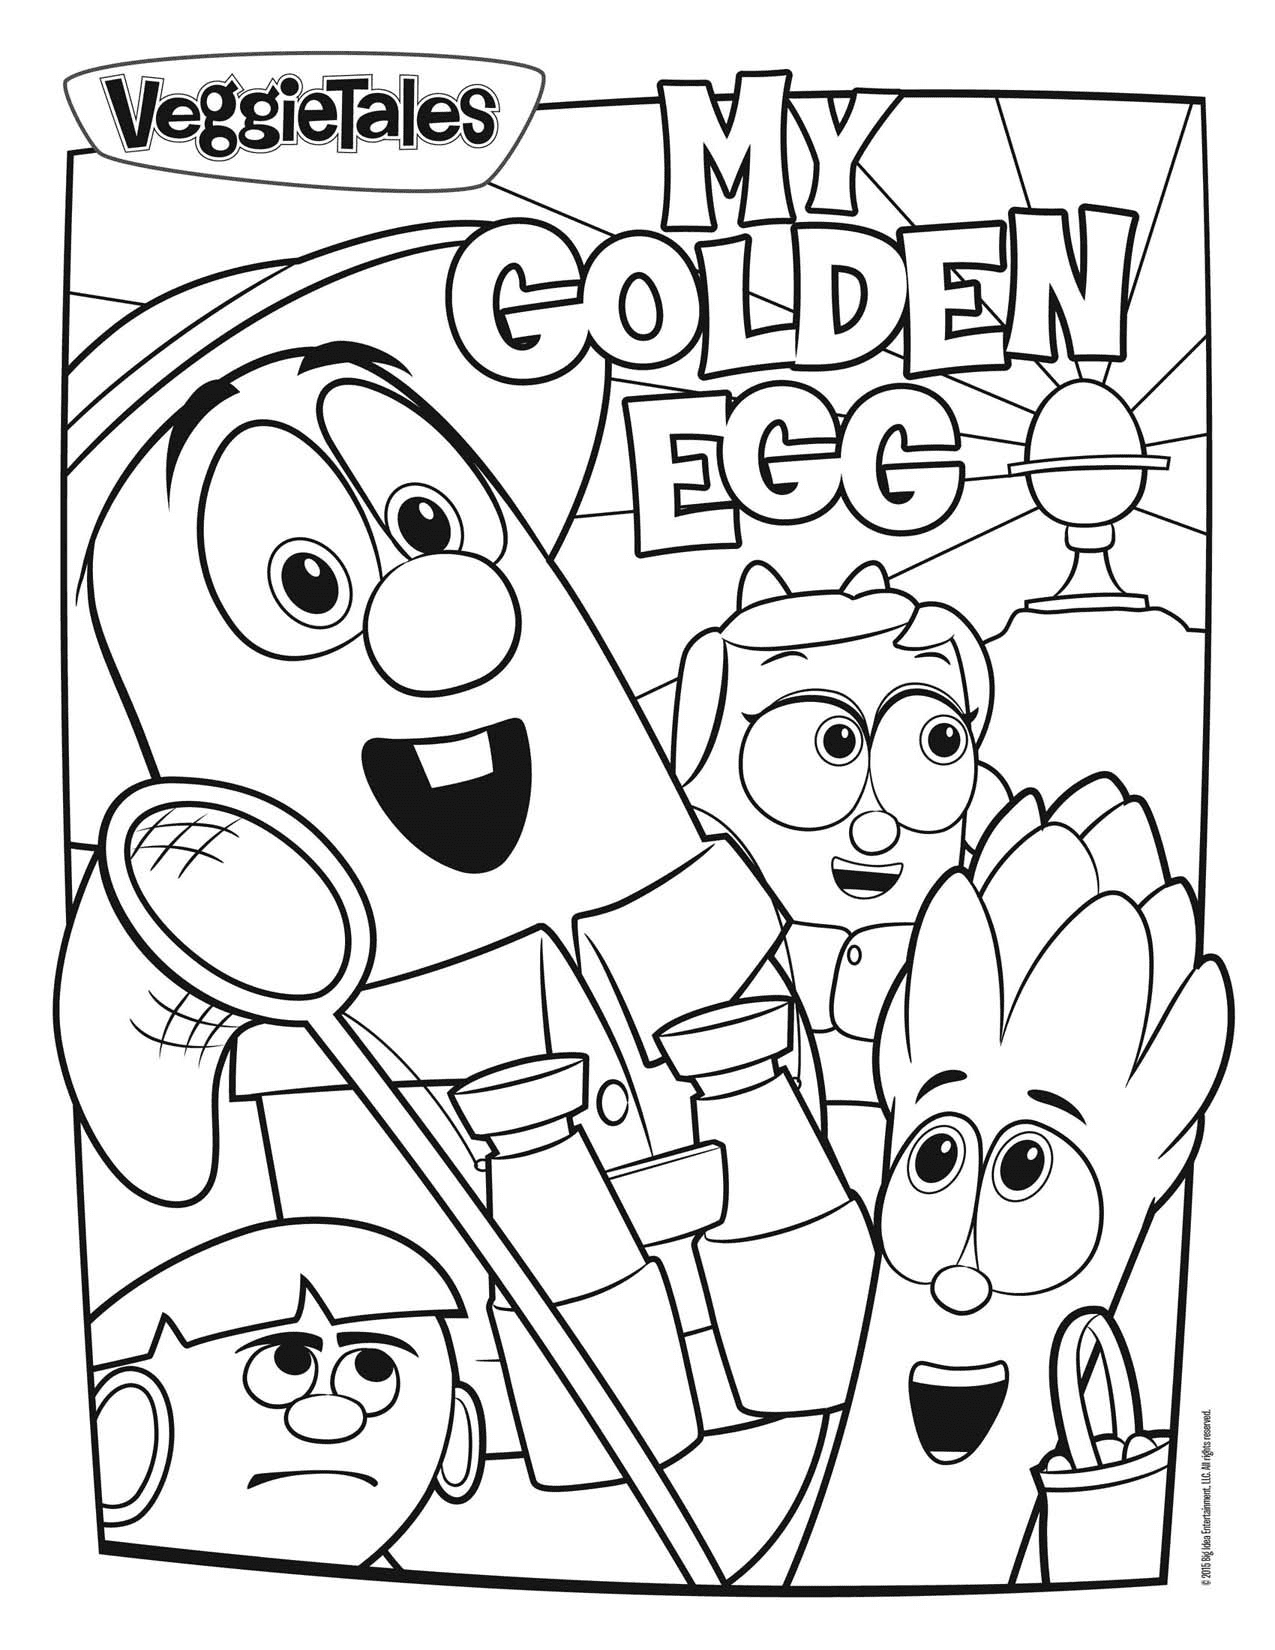 VeggieTales My Golden Egg Coloring Pages